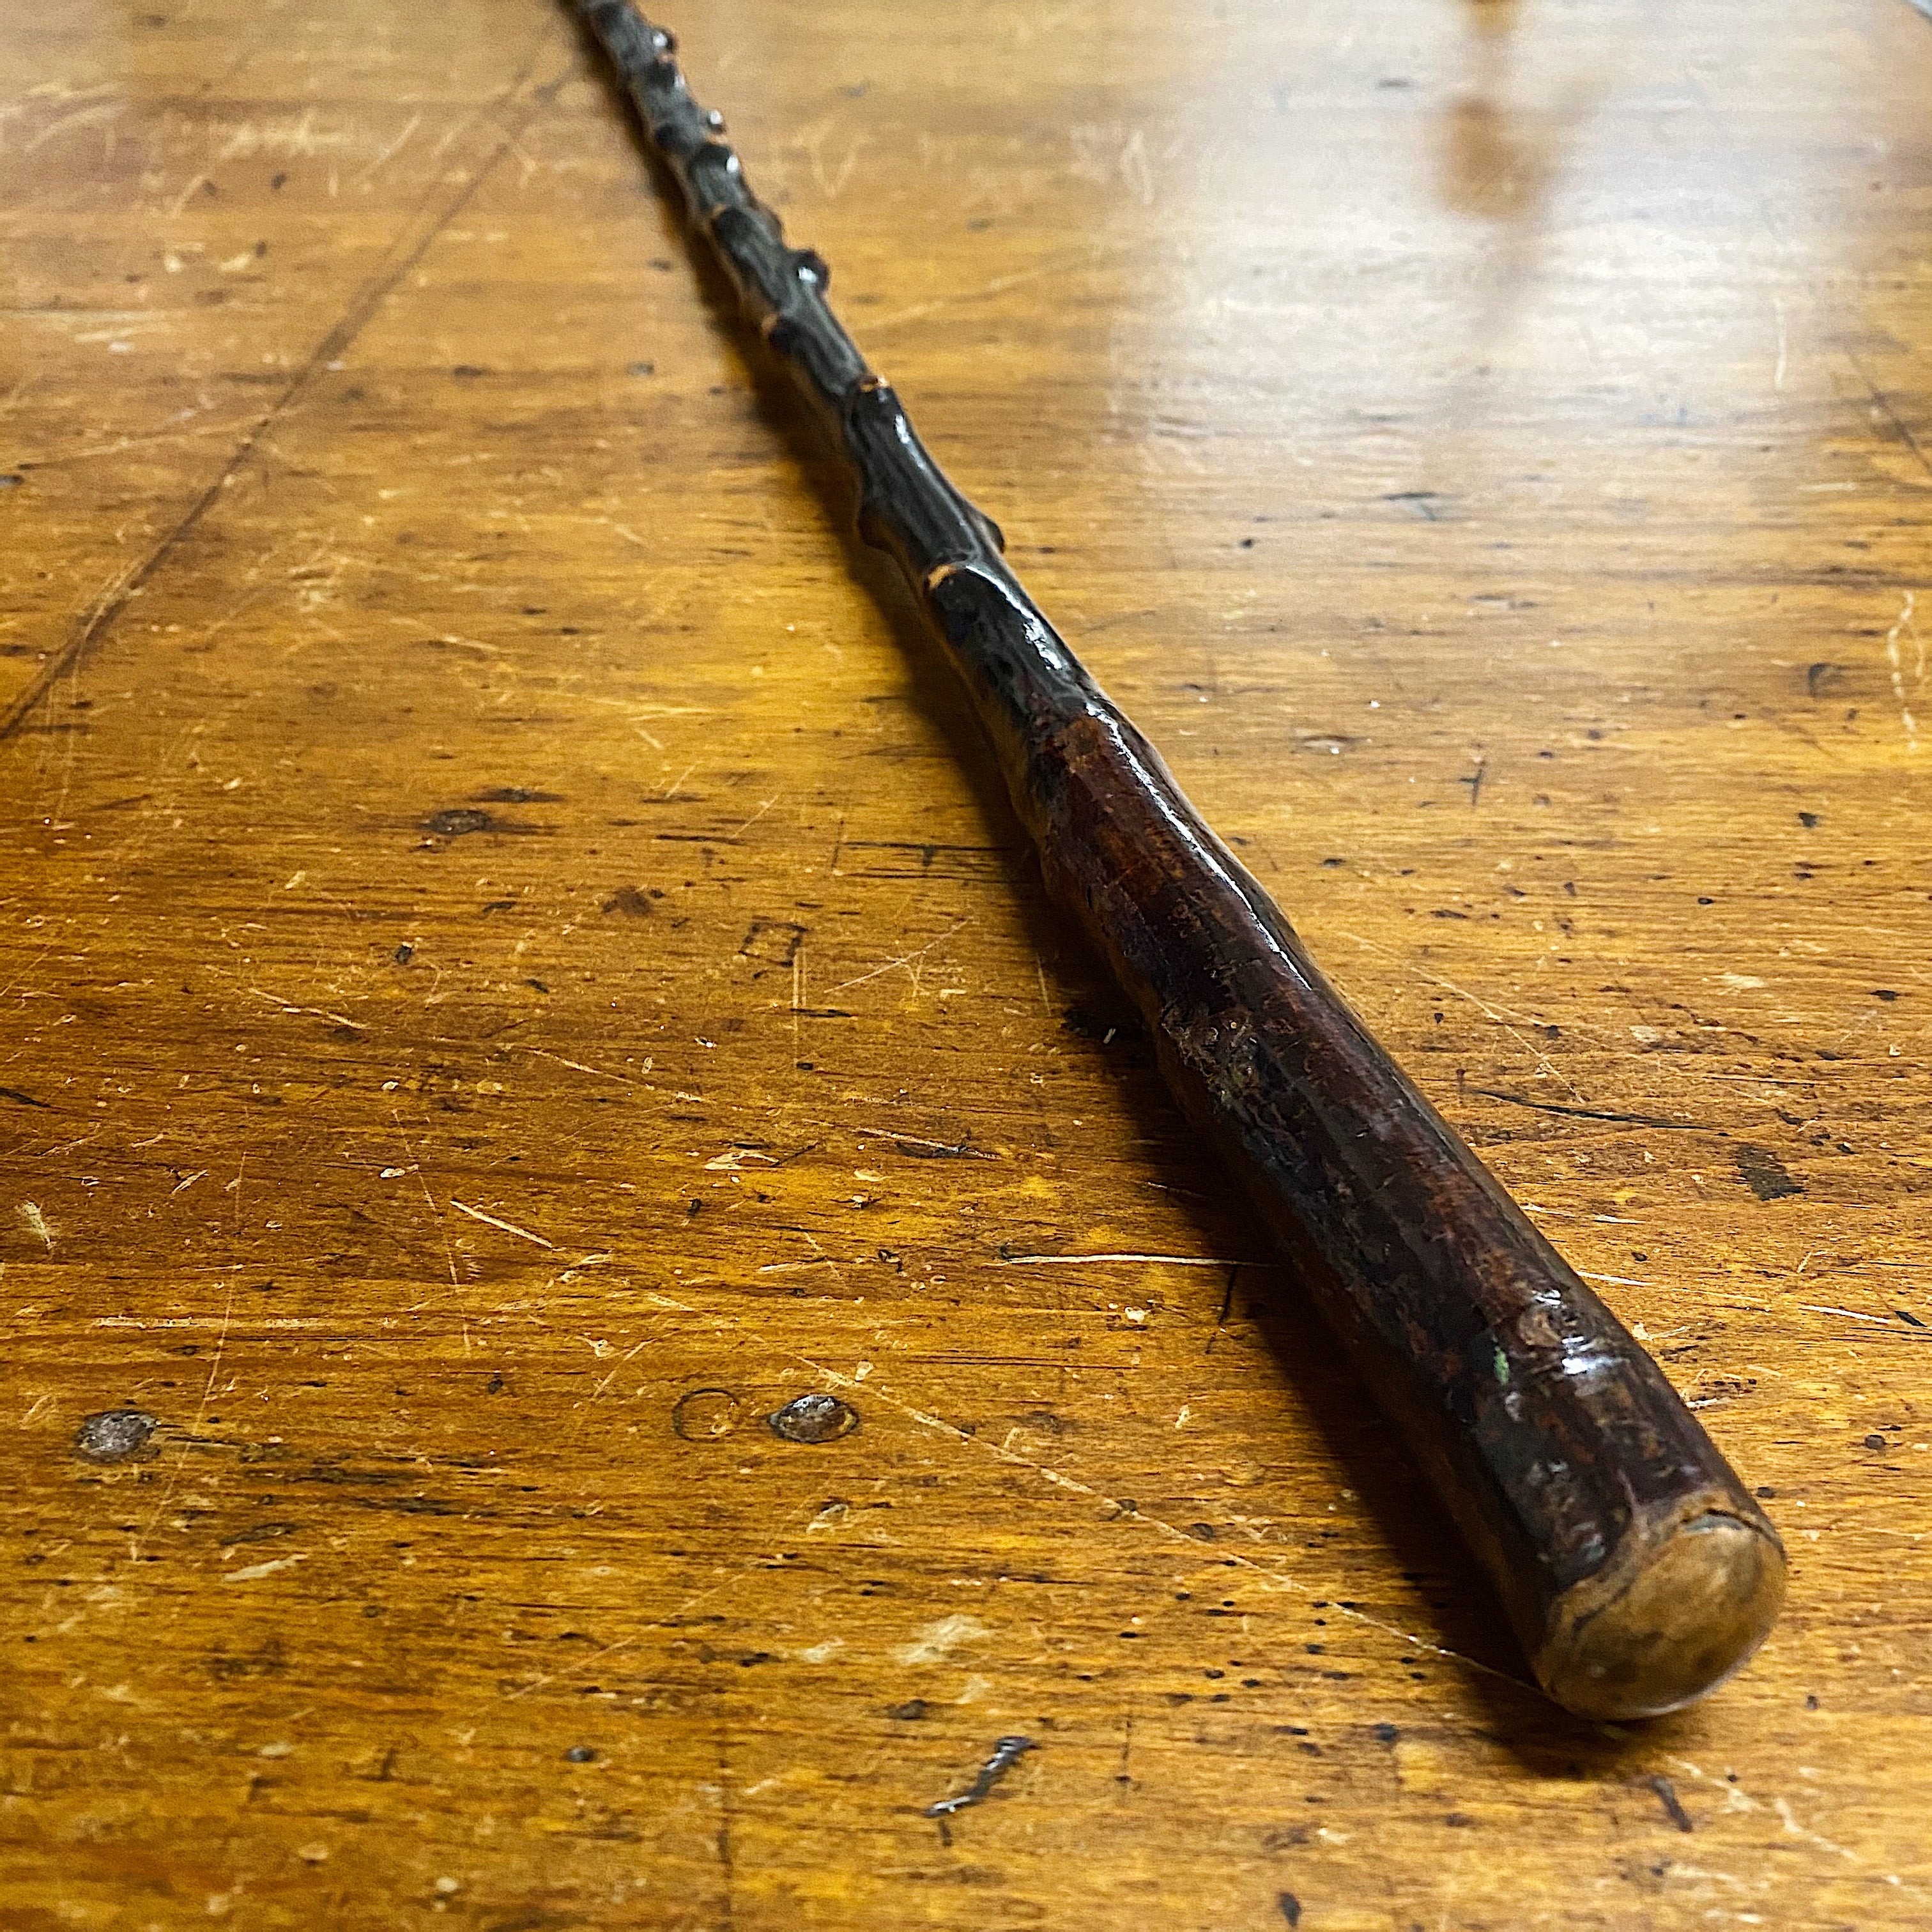 Antique Blackthorn Shillelagh Walking Stick Cane Early 1900s Mad Van Antiques 8991